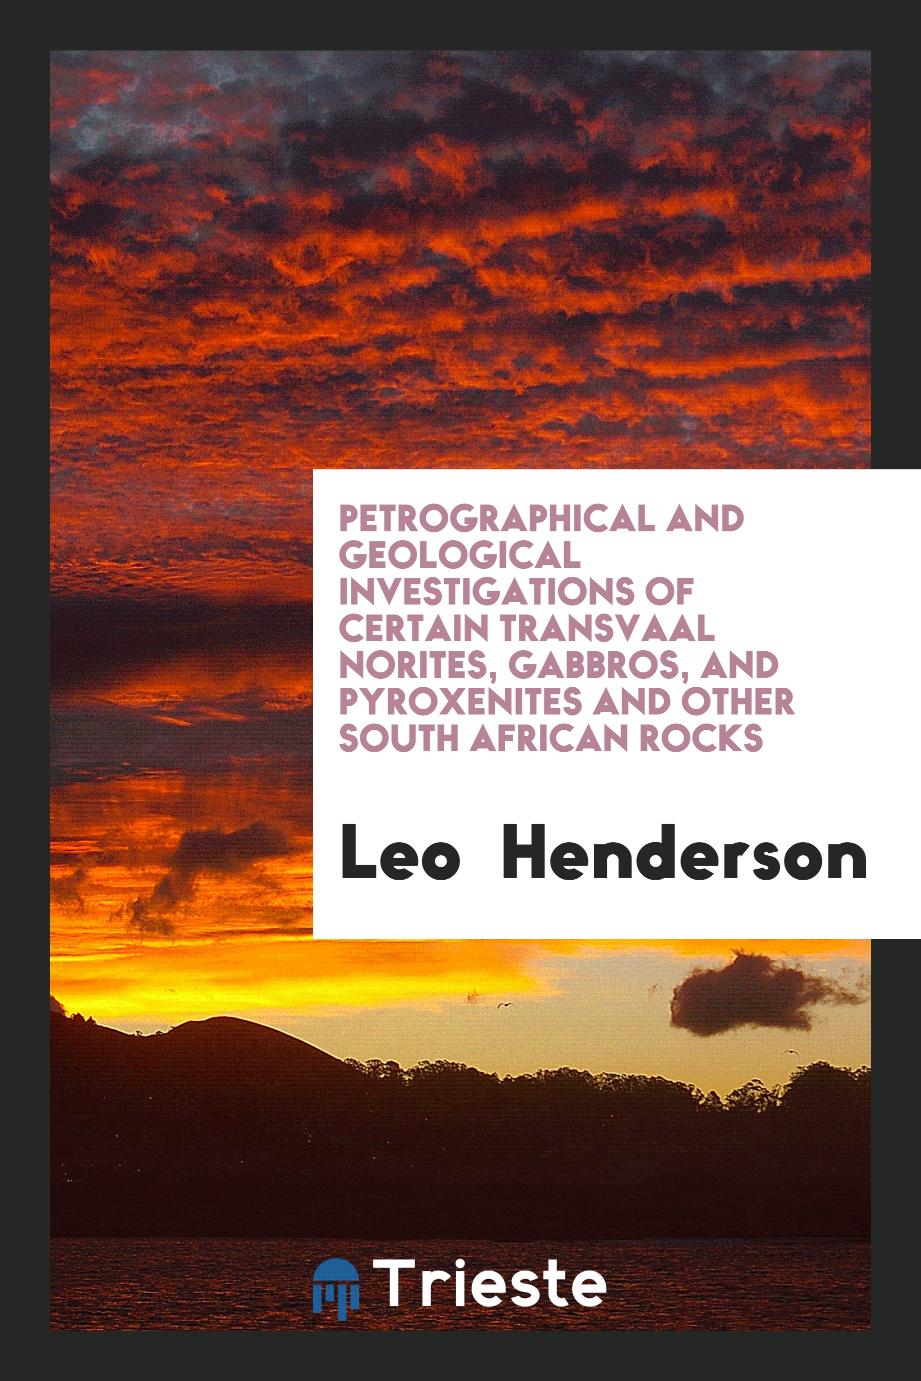 Petrographical and Geological Investigations of Certain Transvaal Norites, Gabbros, and Pyroxenites and other South African Rocks